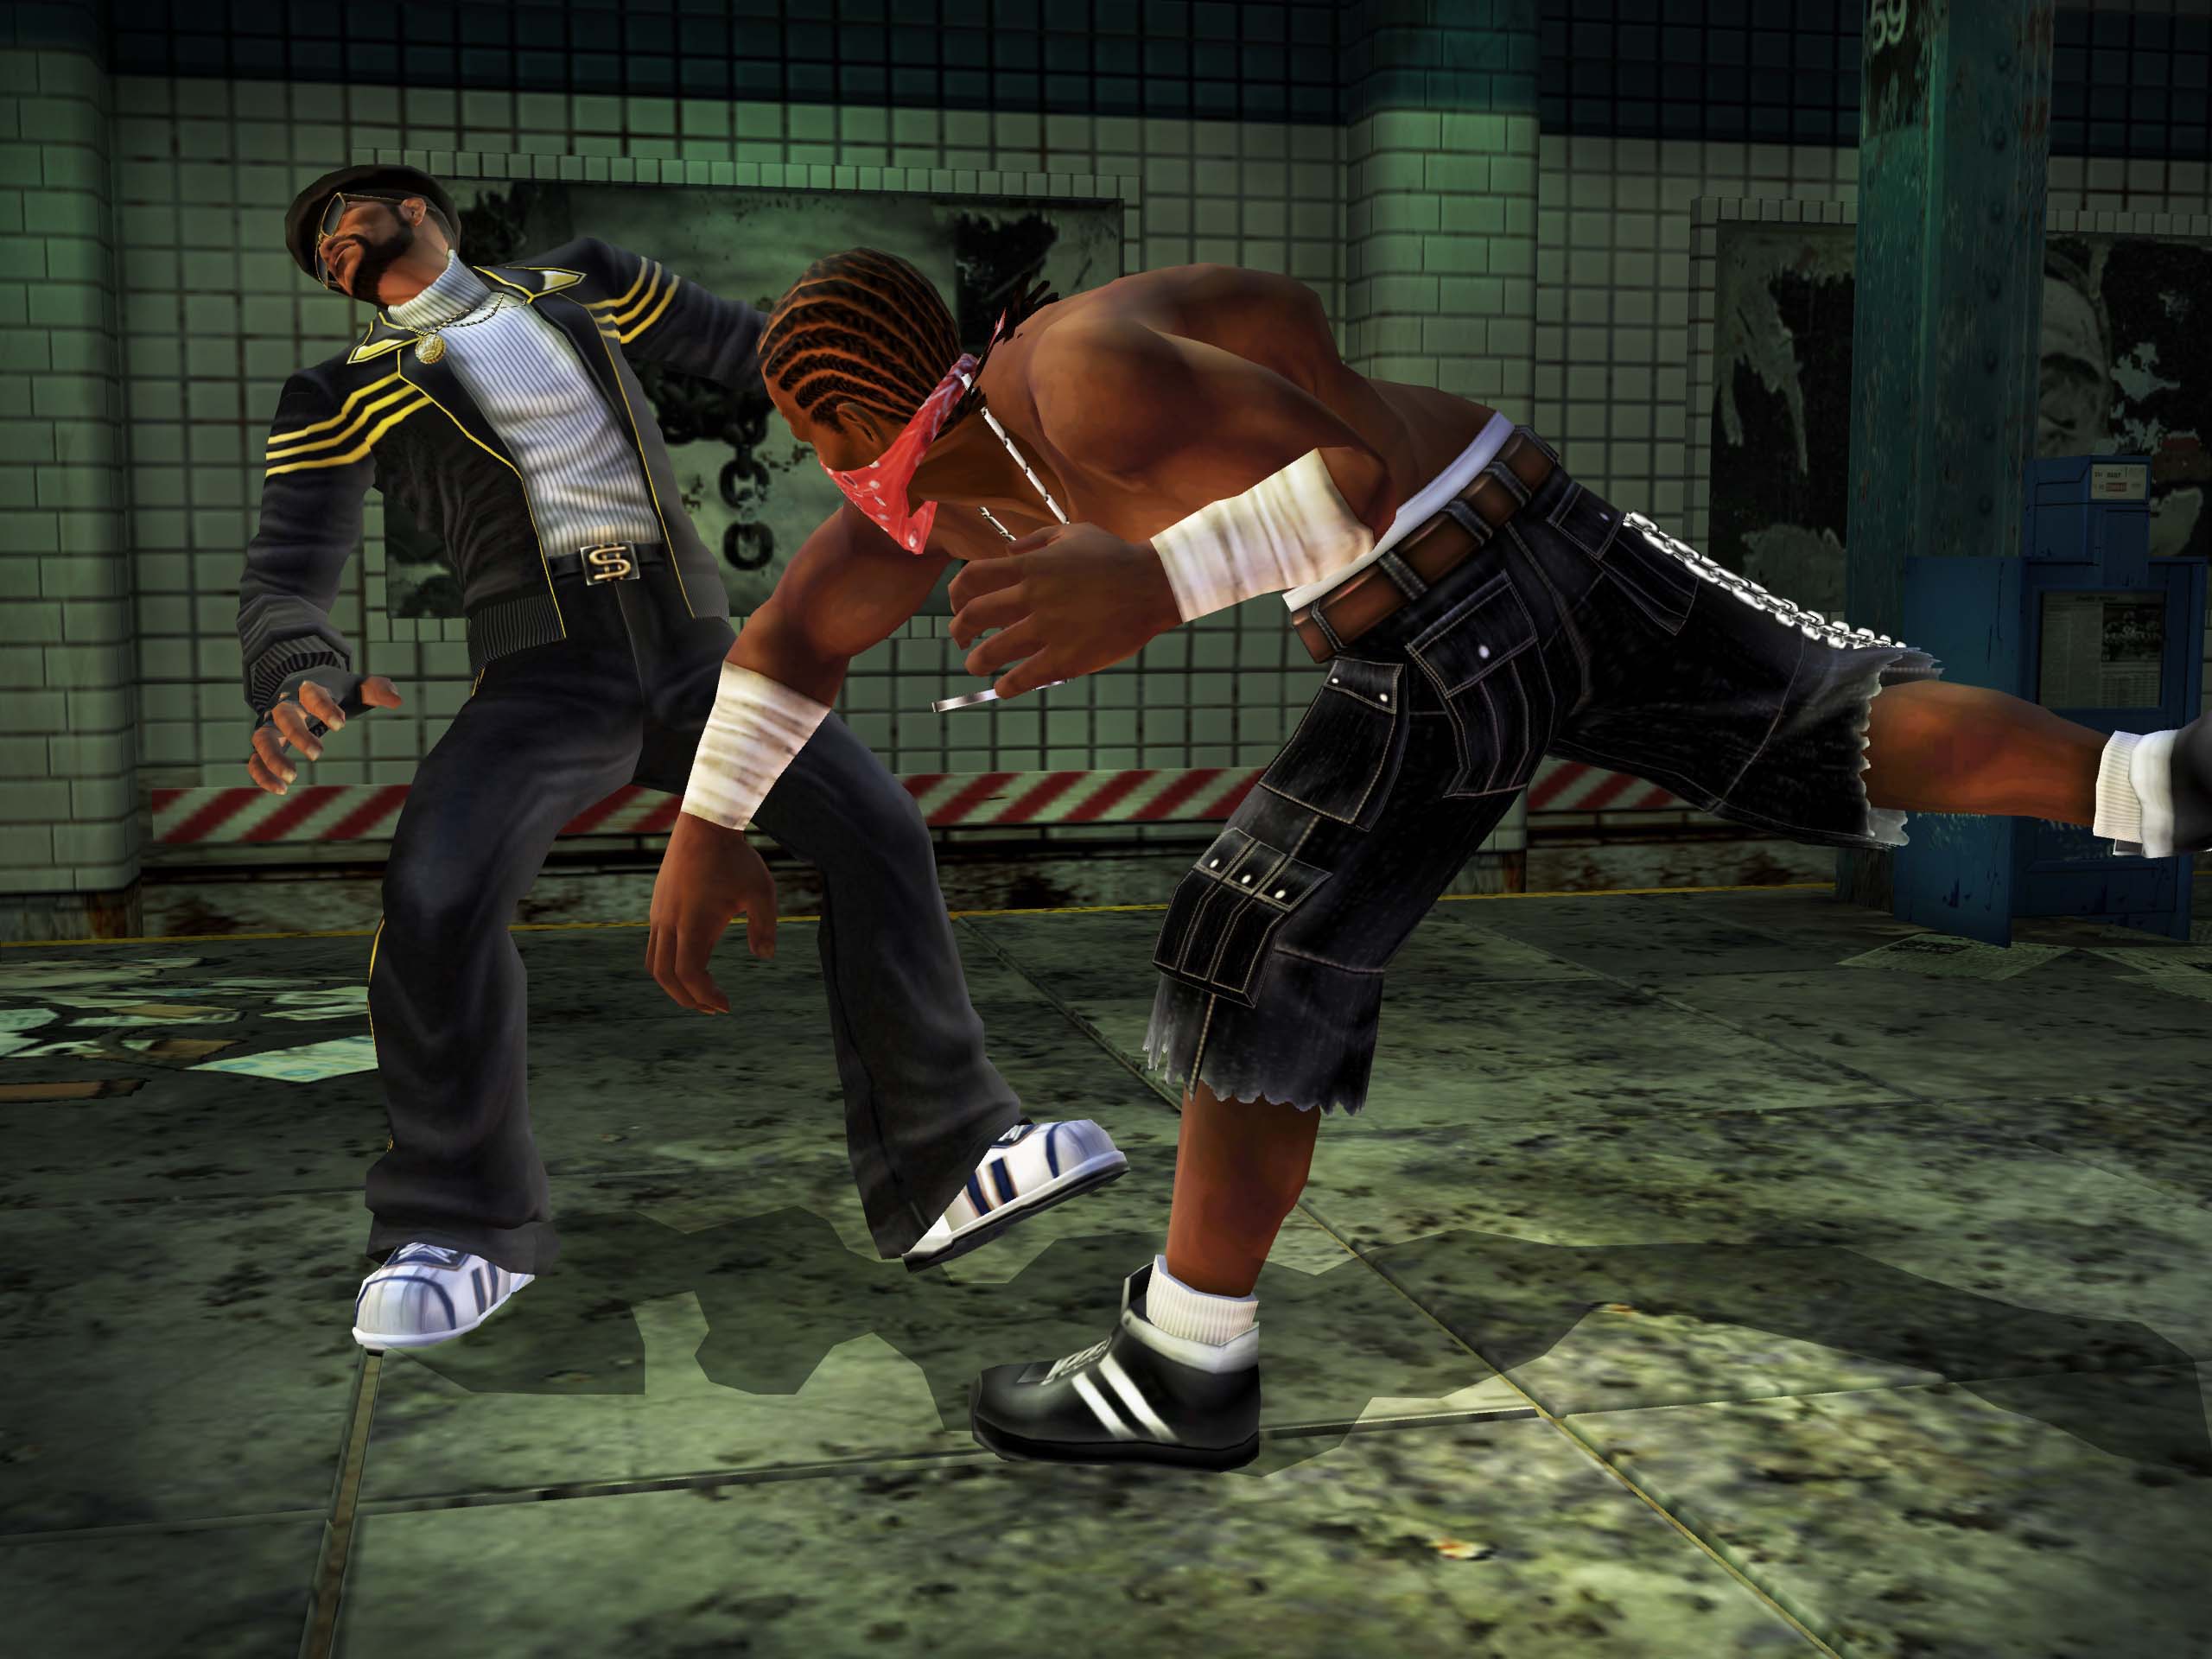 Игра бой класса. Игра Def Jam Fight. Def Jam Fight for NY. Def Jam 2 ps2. PLAYSTATION 2 Def Jam Fight for NY.